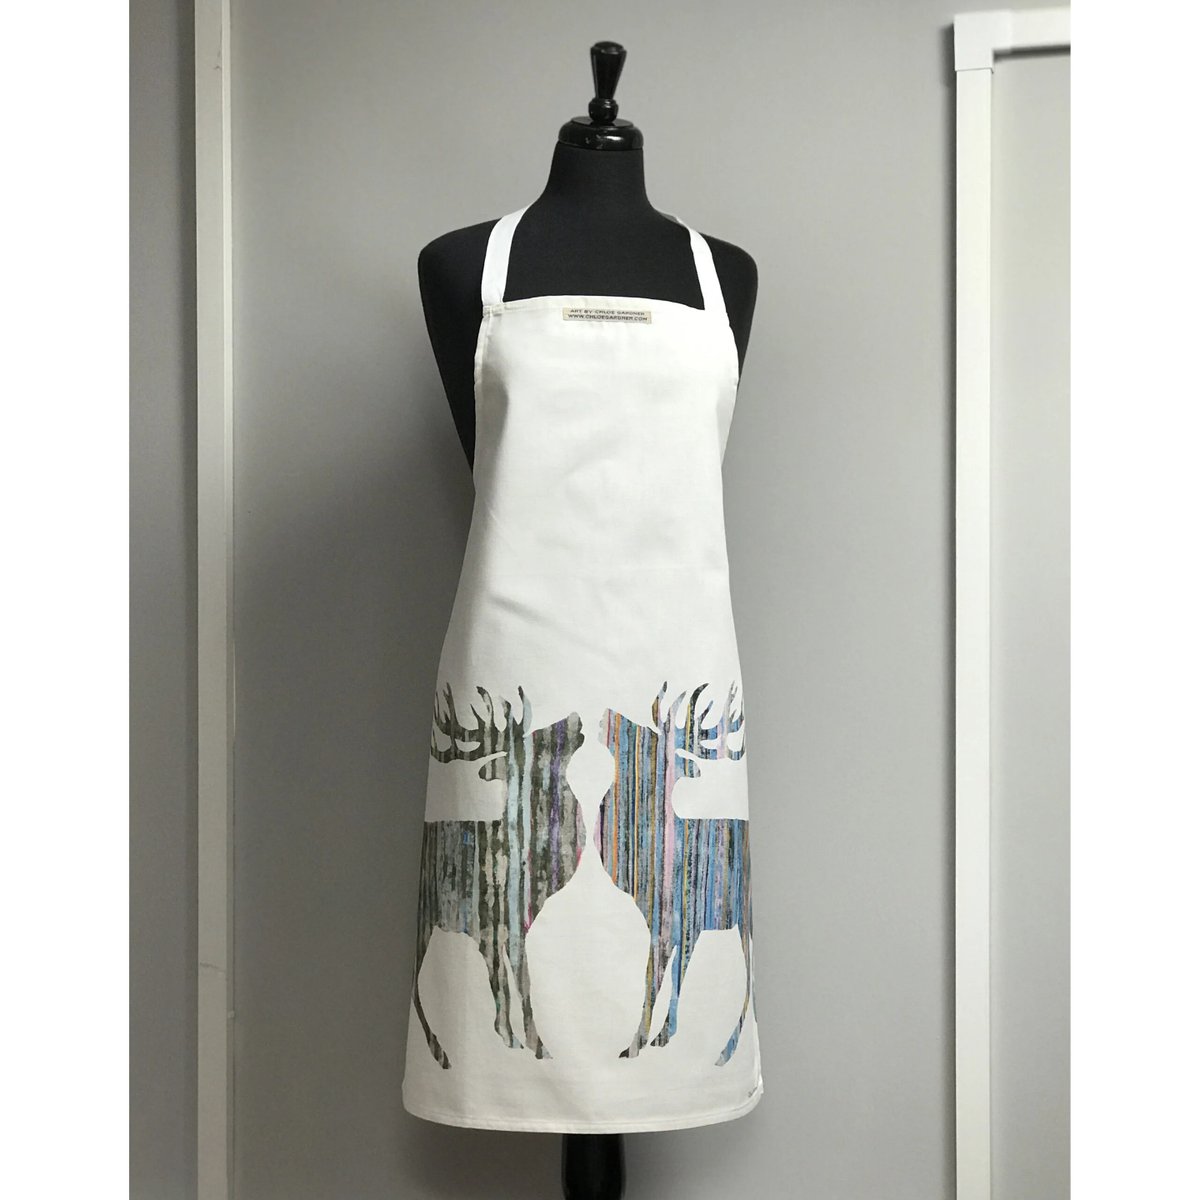 Introducing our majestic silver stag apron! 🦌🦌 Add a touch of nature's elegance to your kitchen attire. Crafted with quality and style, it's the perfect choice for any culinary adventure. Get yours now! 🍽️✨ #giftsthatdelight #Scotland #CountrysideChic